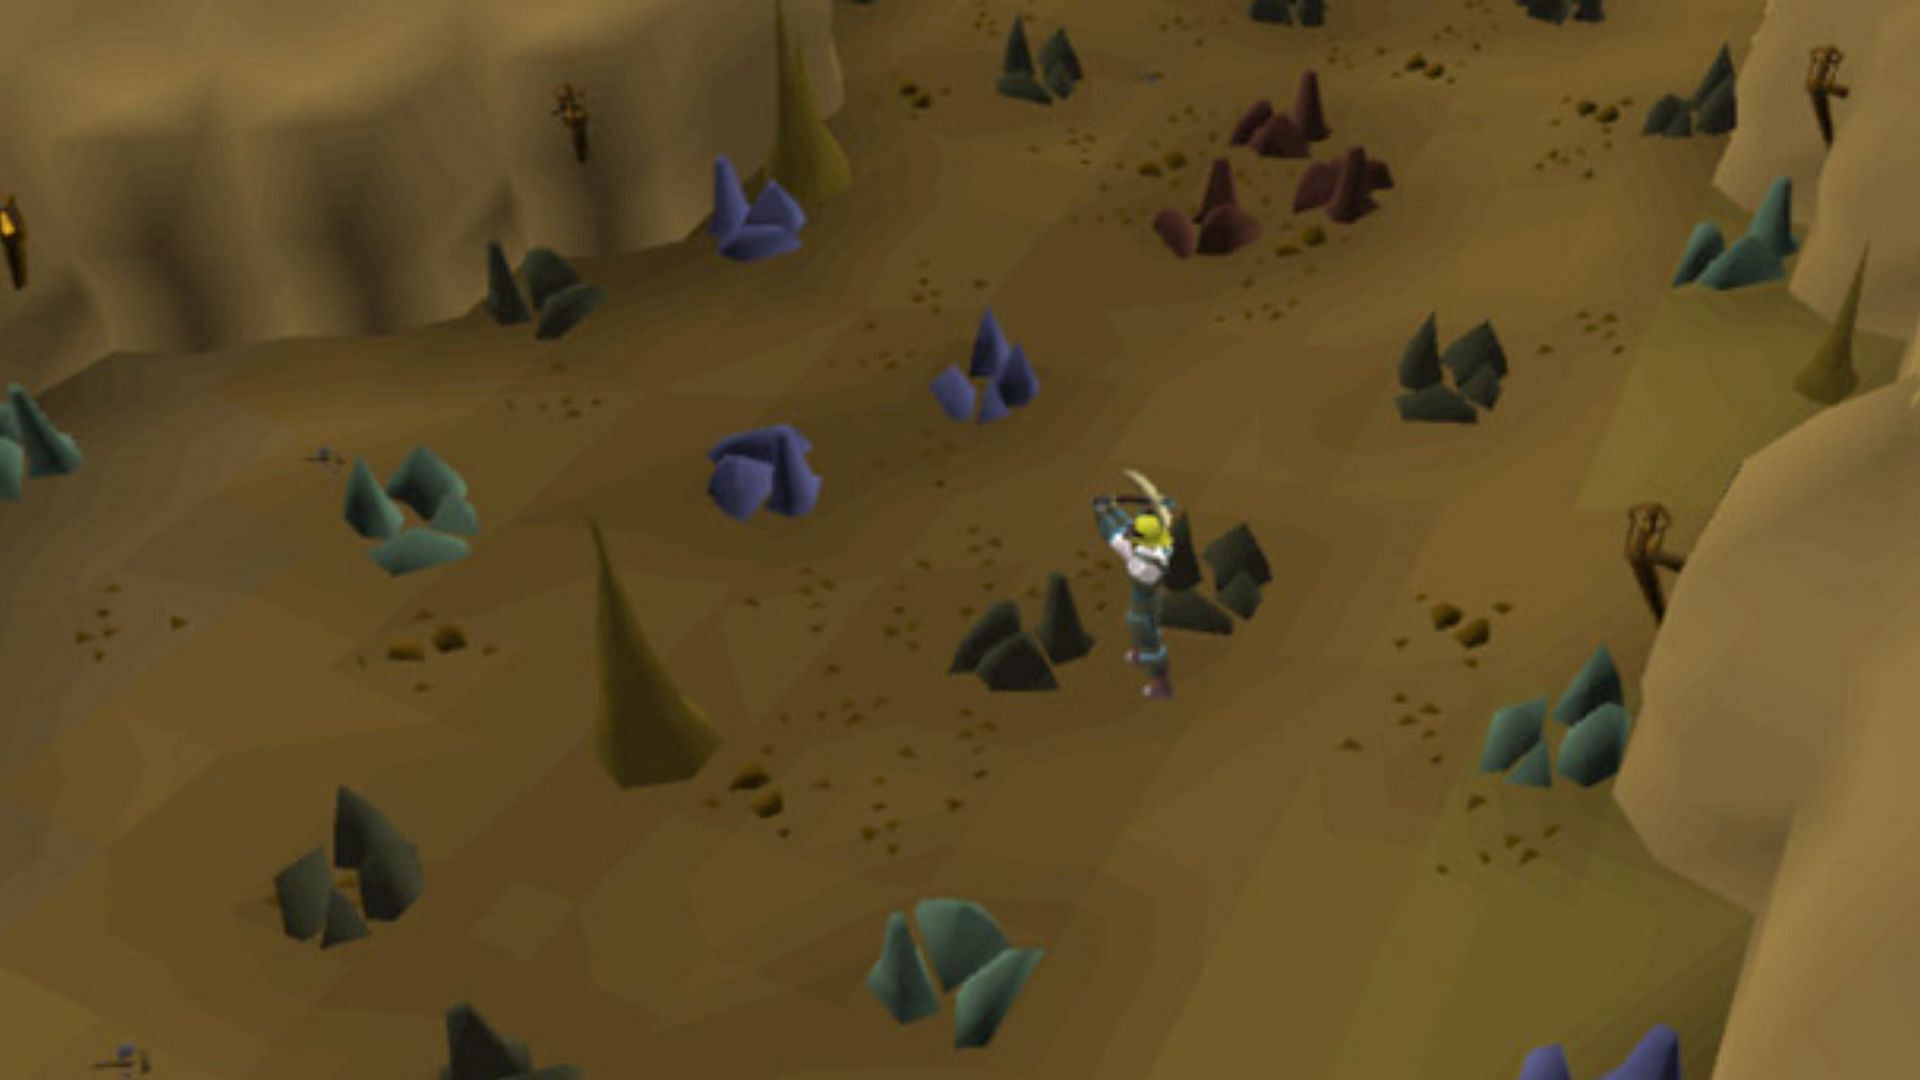 The Varlamore update brings new ways for players to upgrade their mining skills (Image via Jagex)